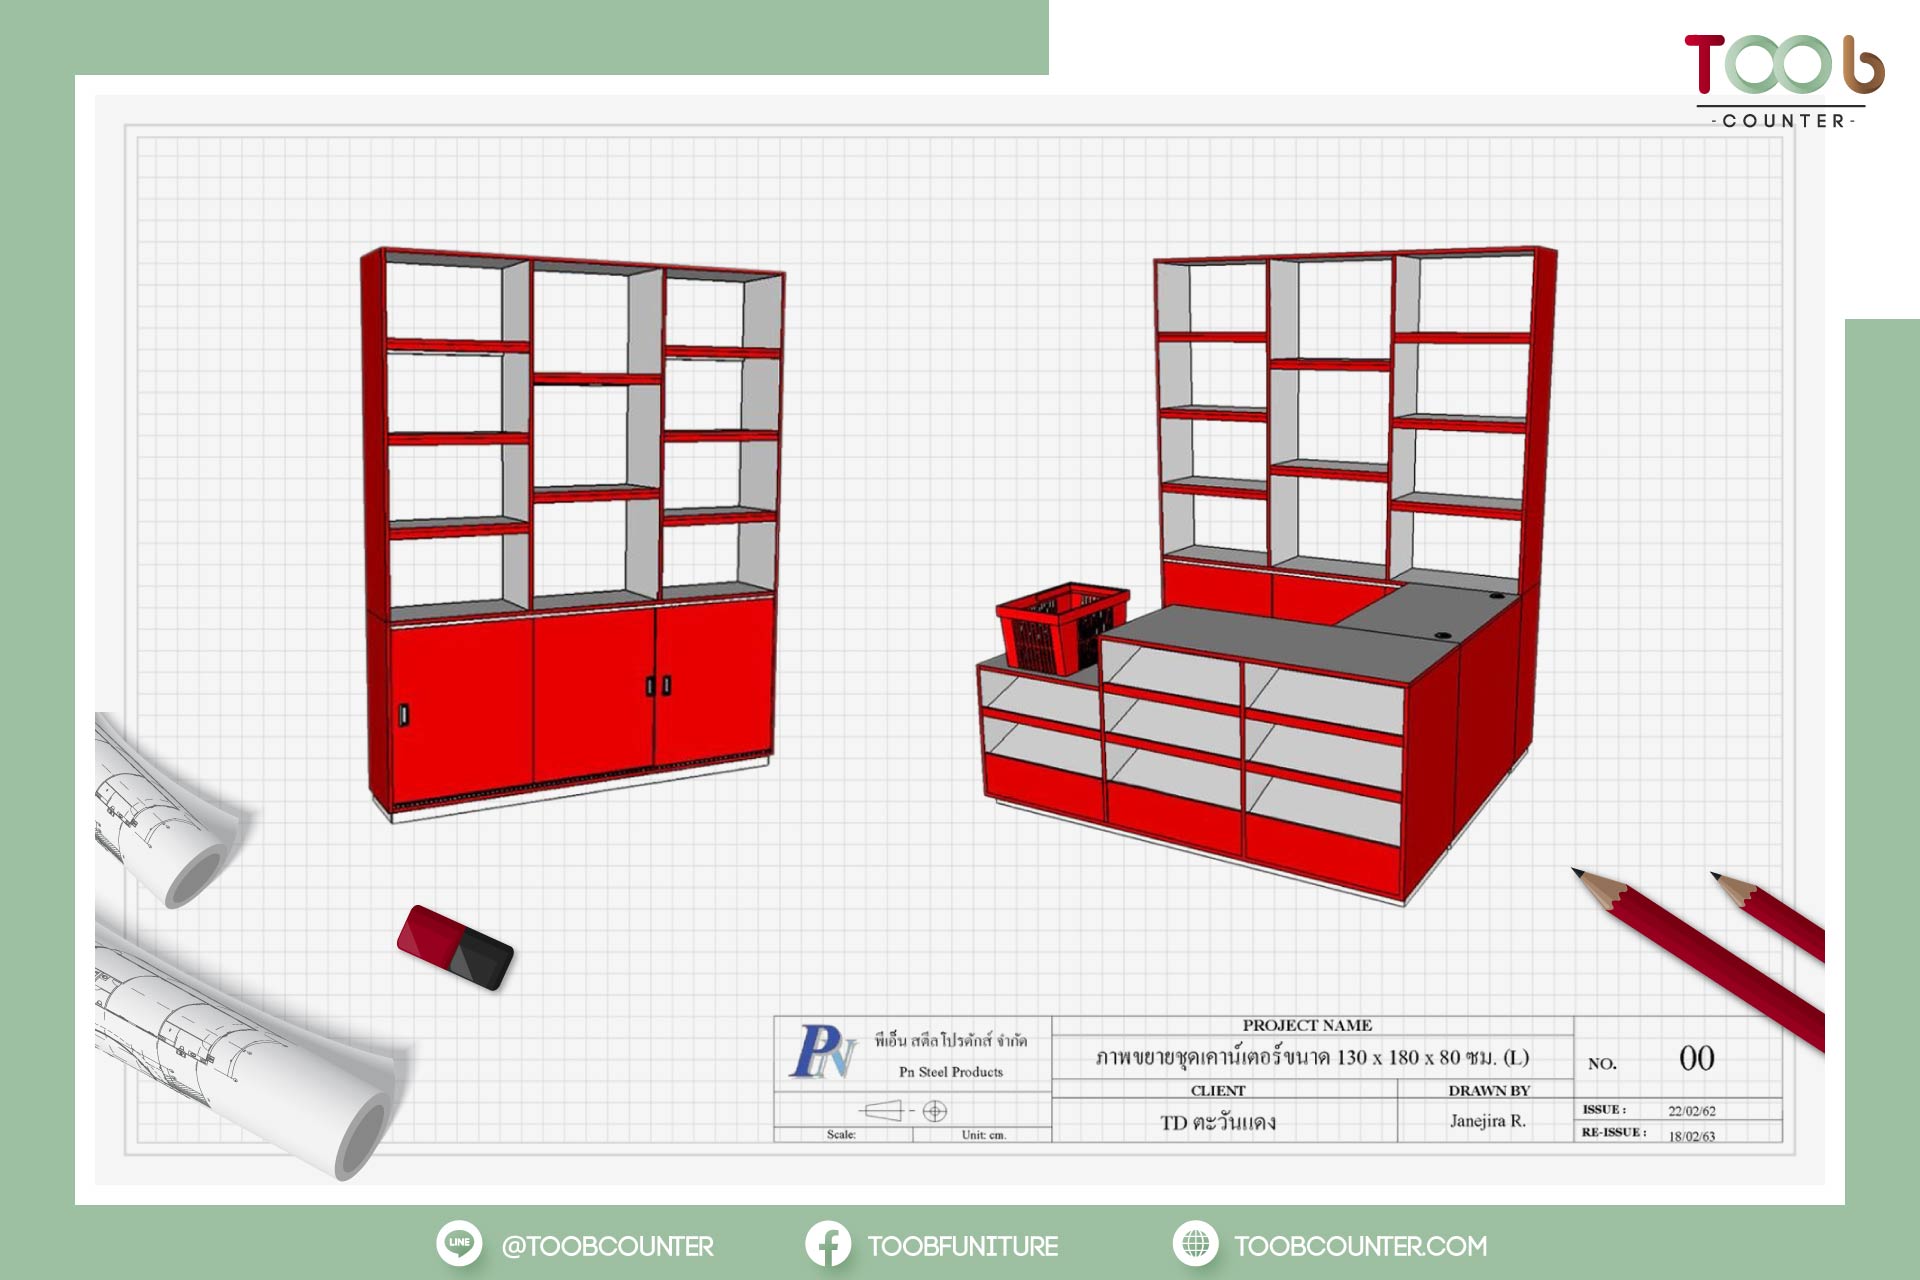 Drawing perspective view design red retail checkout counter sideboard